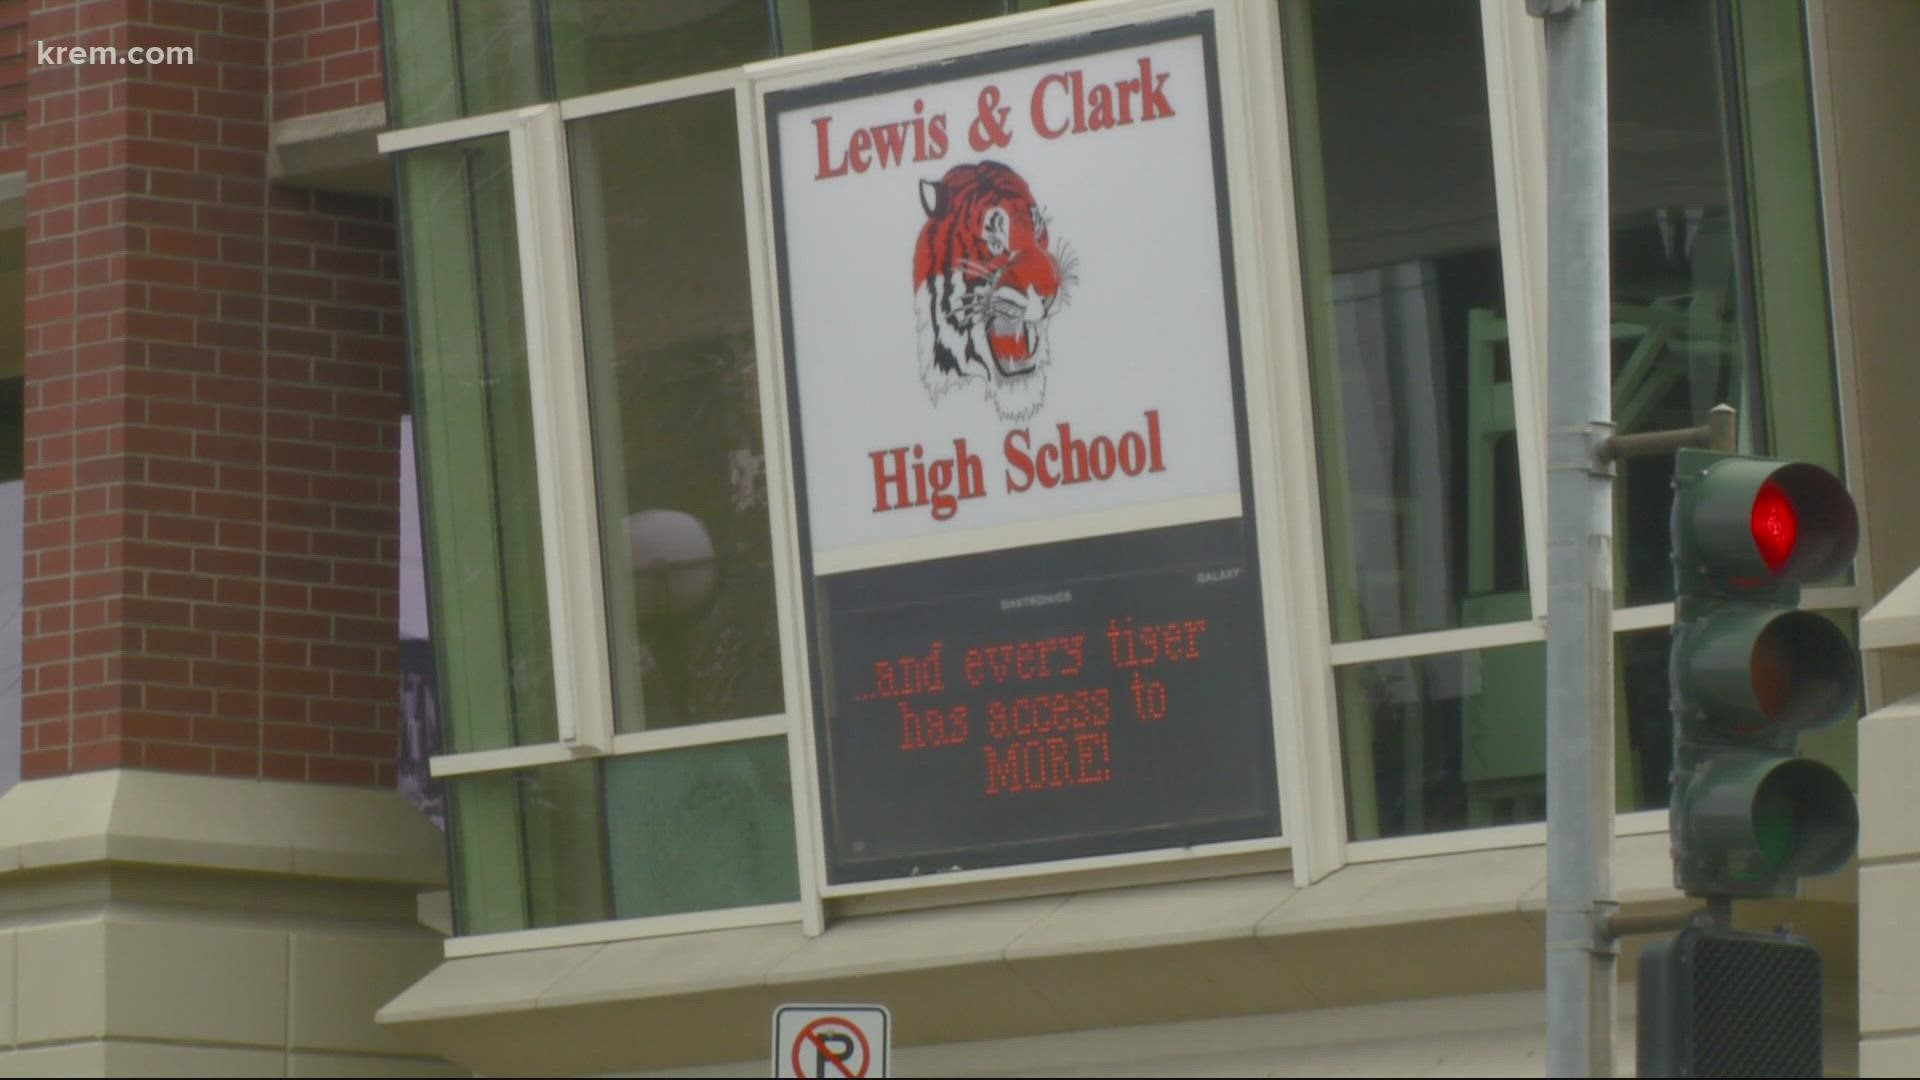 One student voiced concerns after having her car broken into while attending school